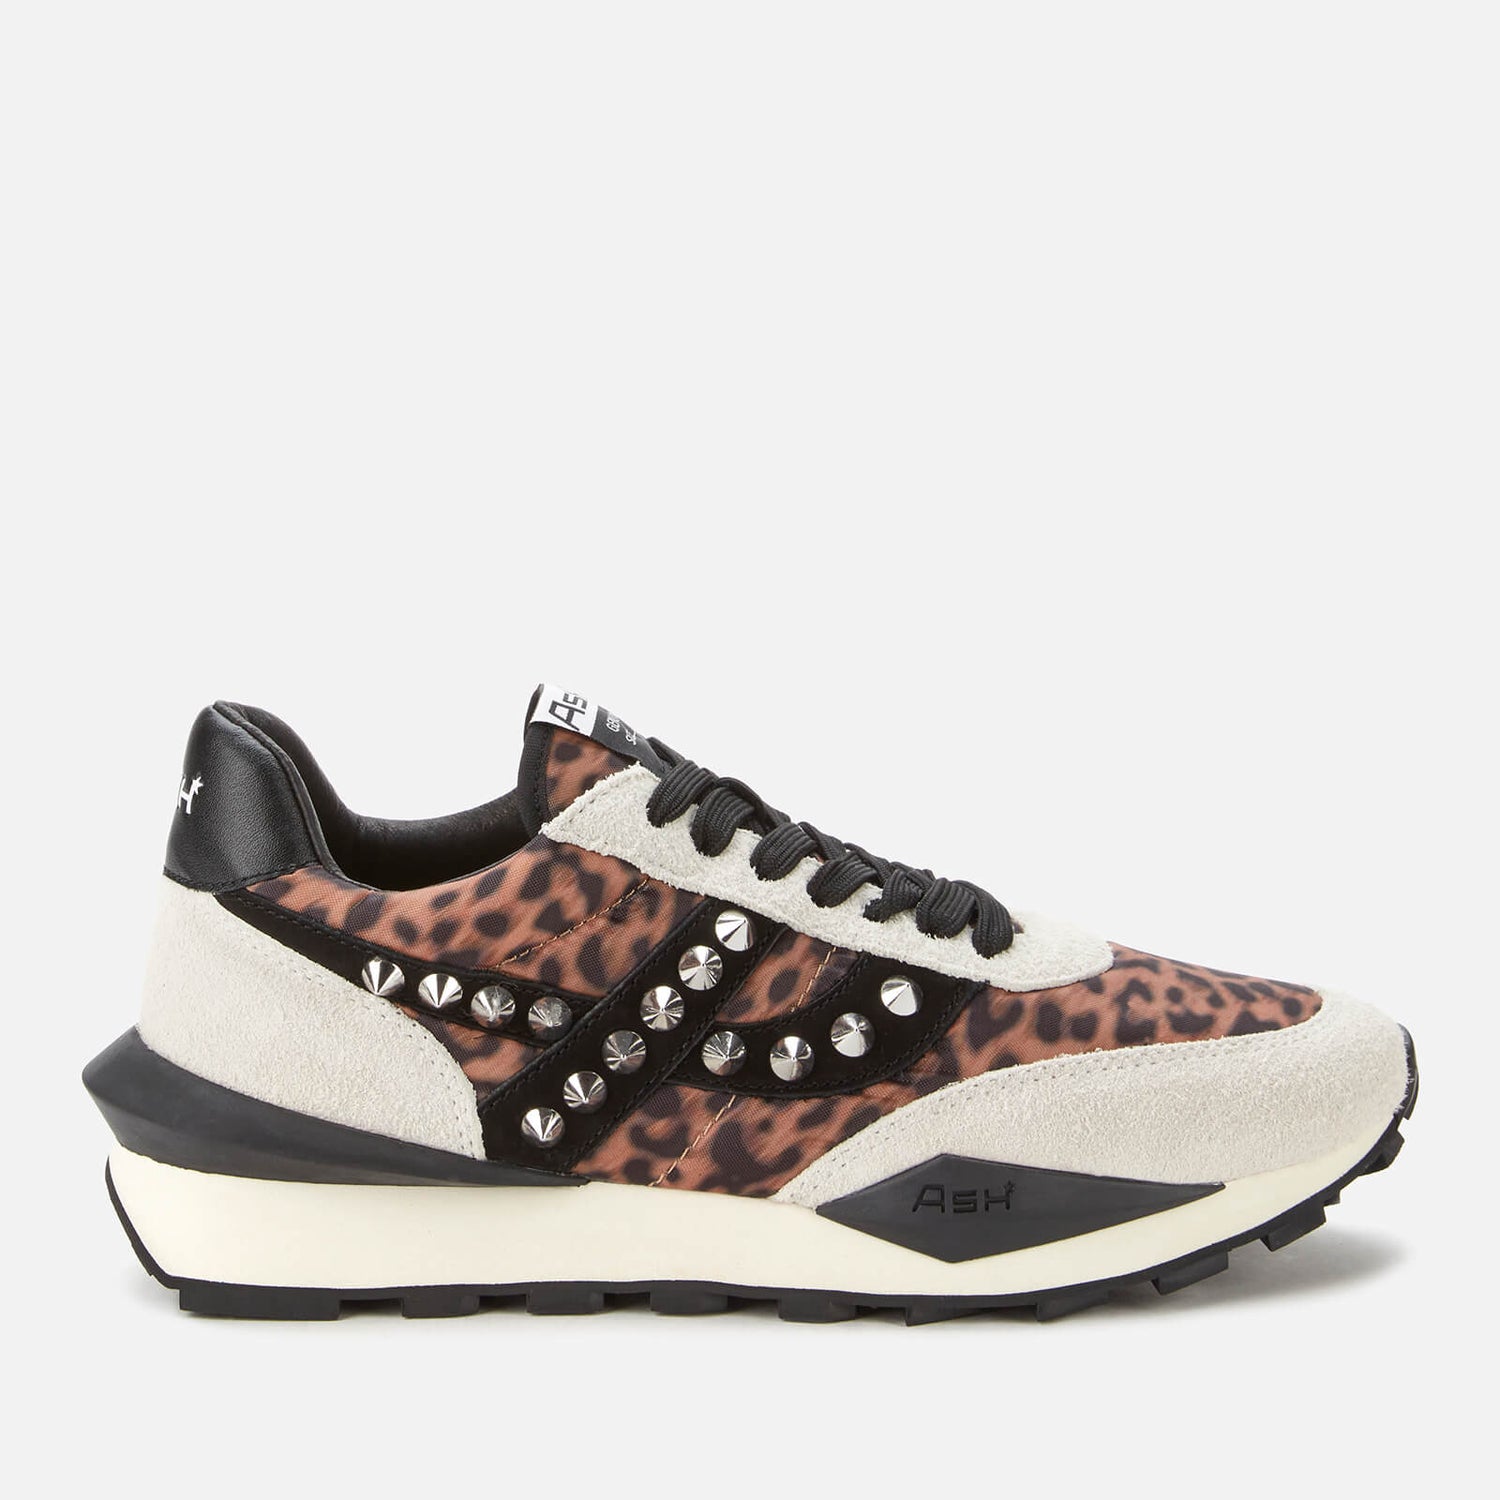 Ash Women's Spider Studs Sustainable Running Style Trainers - Off White/Beige/Black